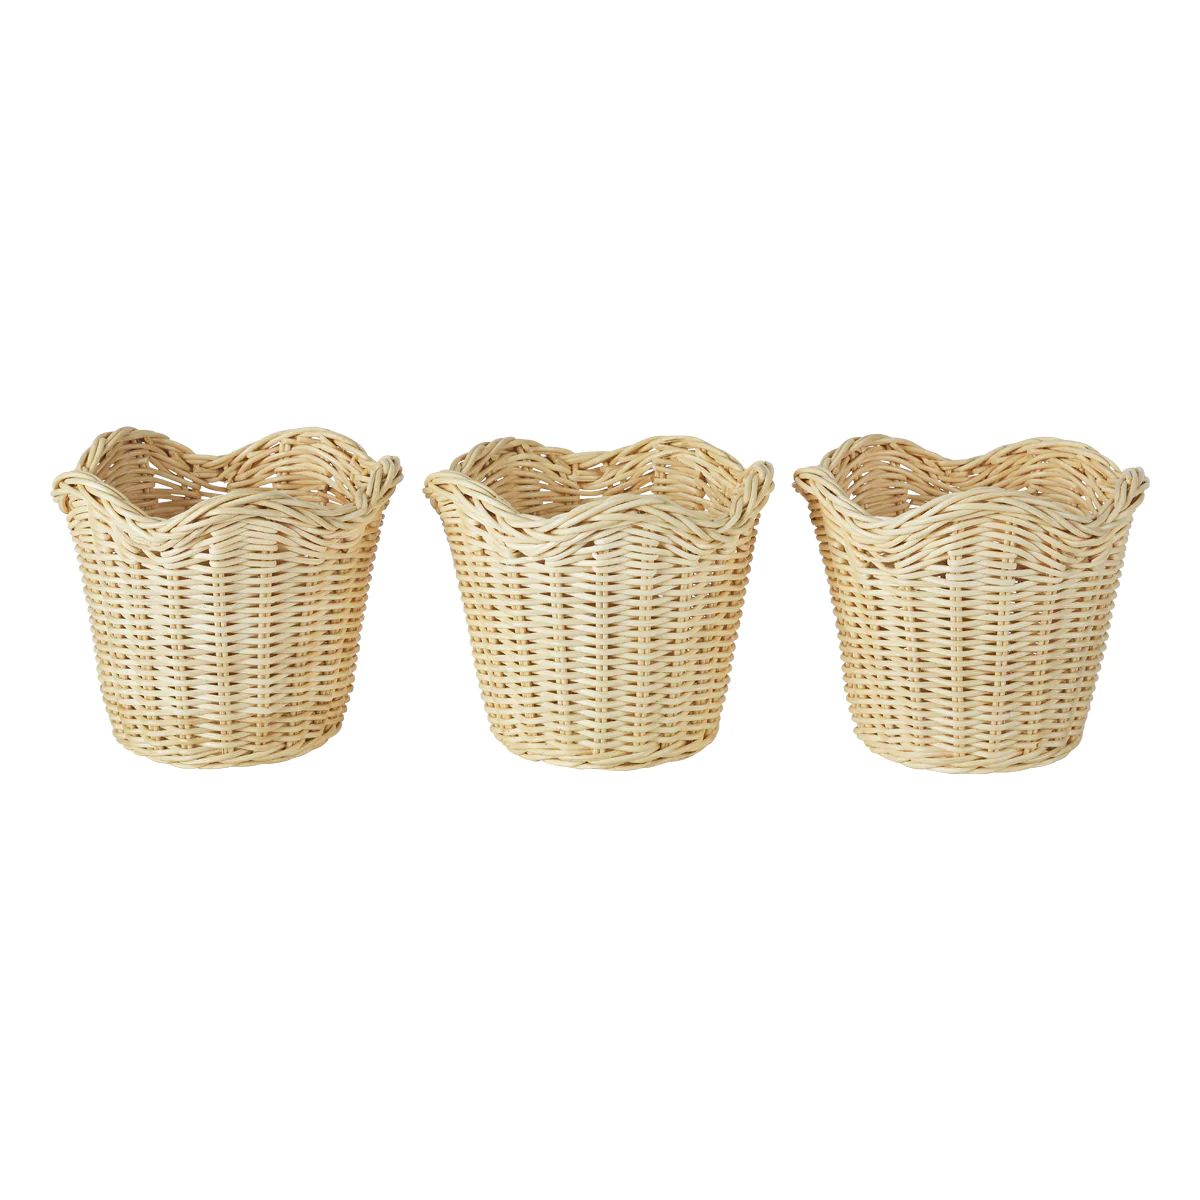 Wavy Wicker Orchid Baskets Small, Set of 3 | Amanda Lindroth